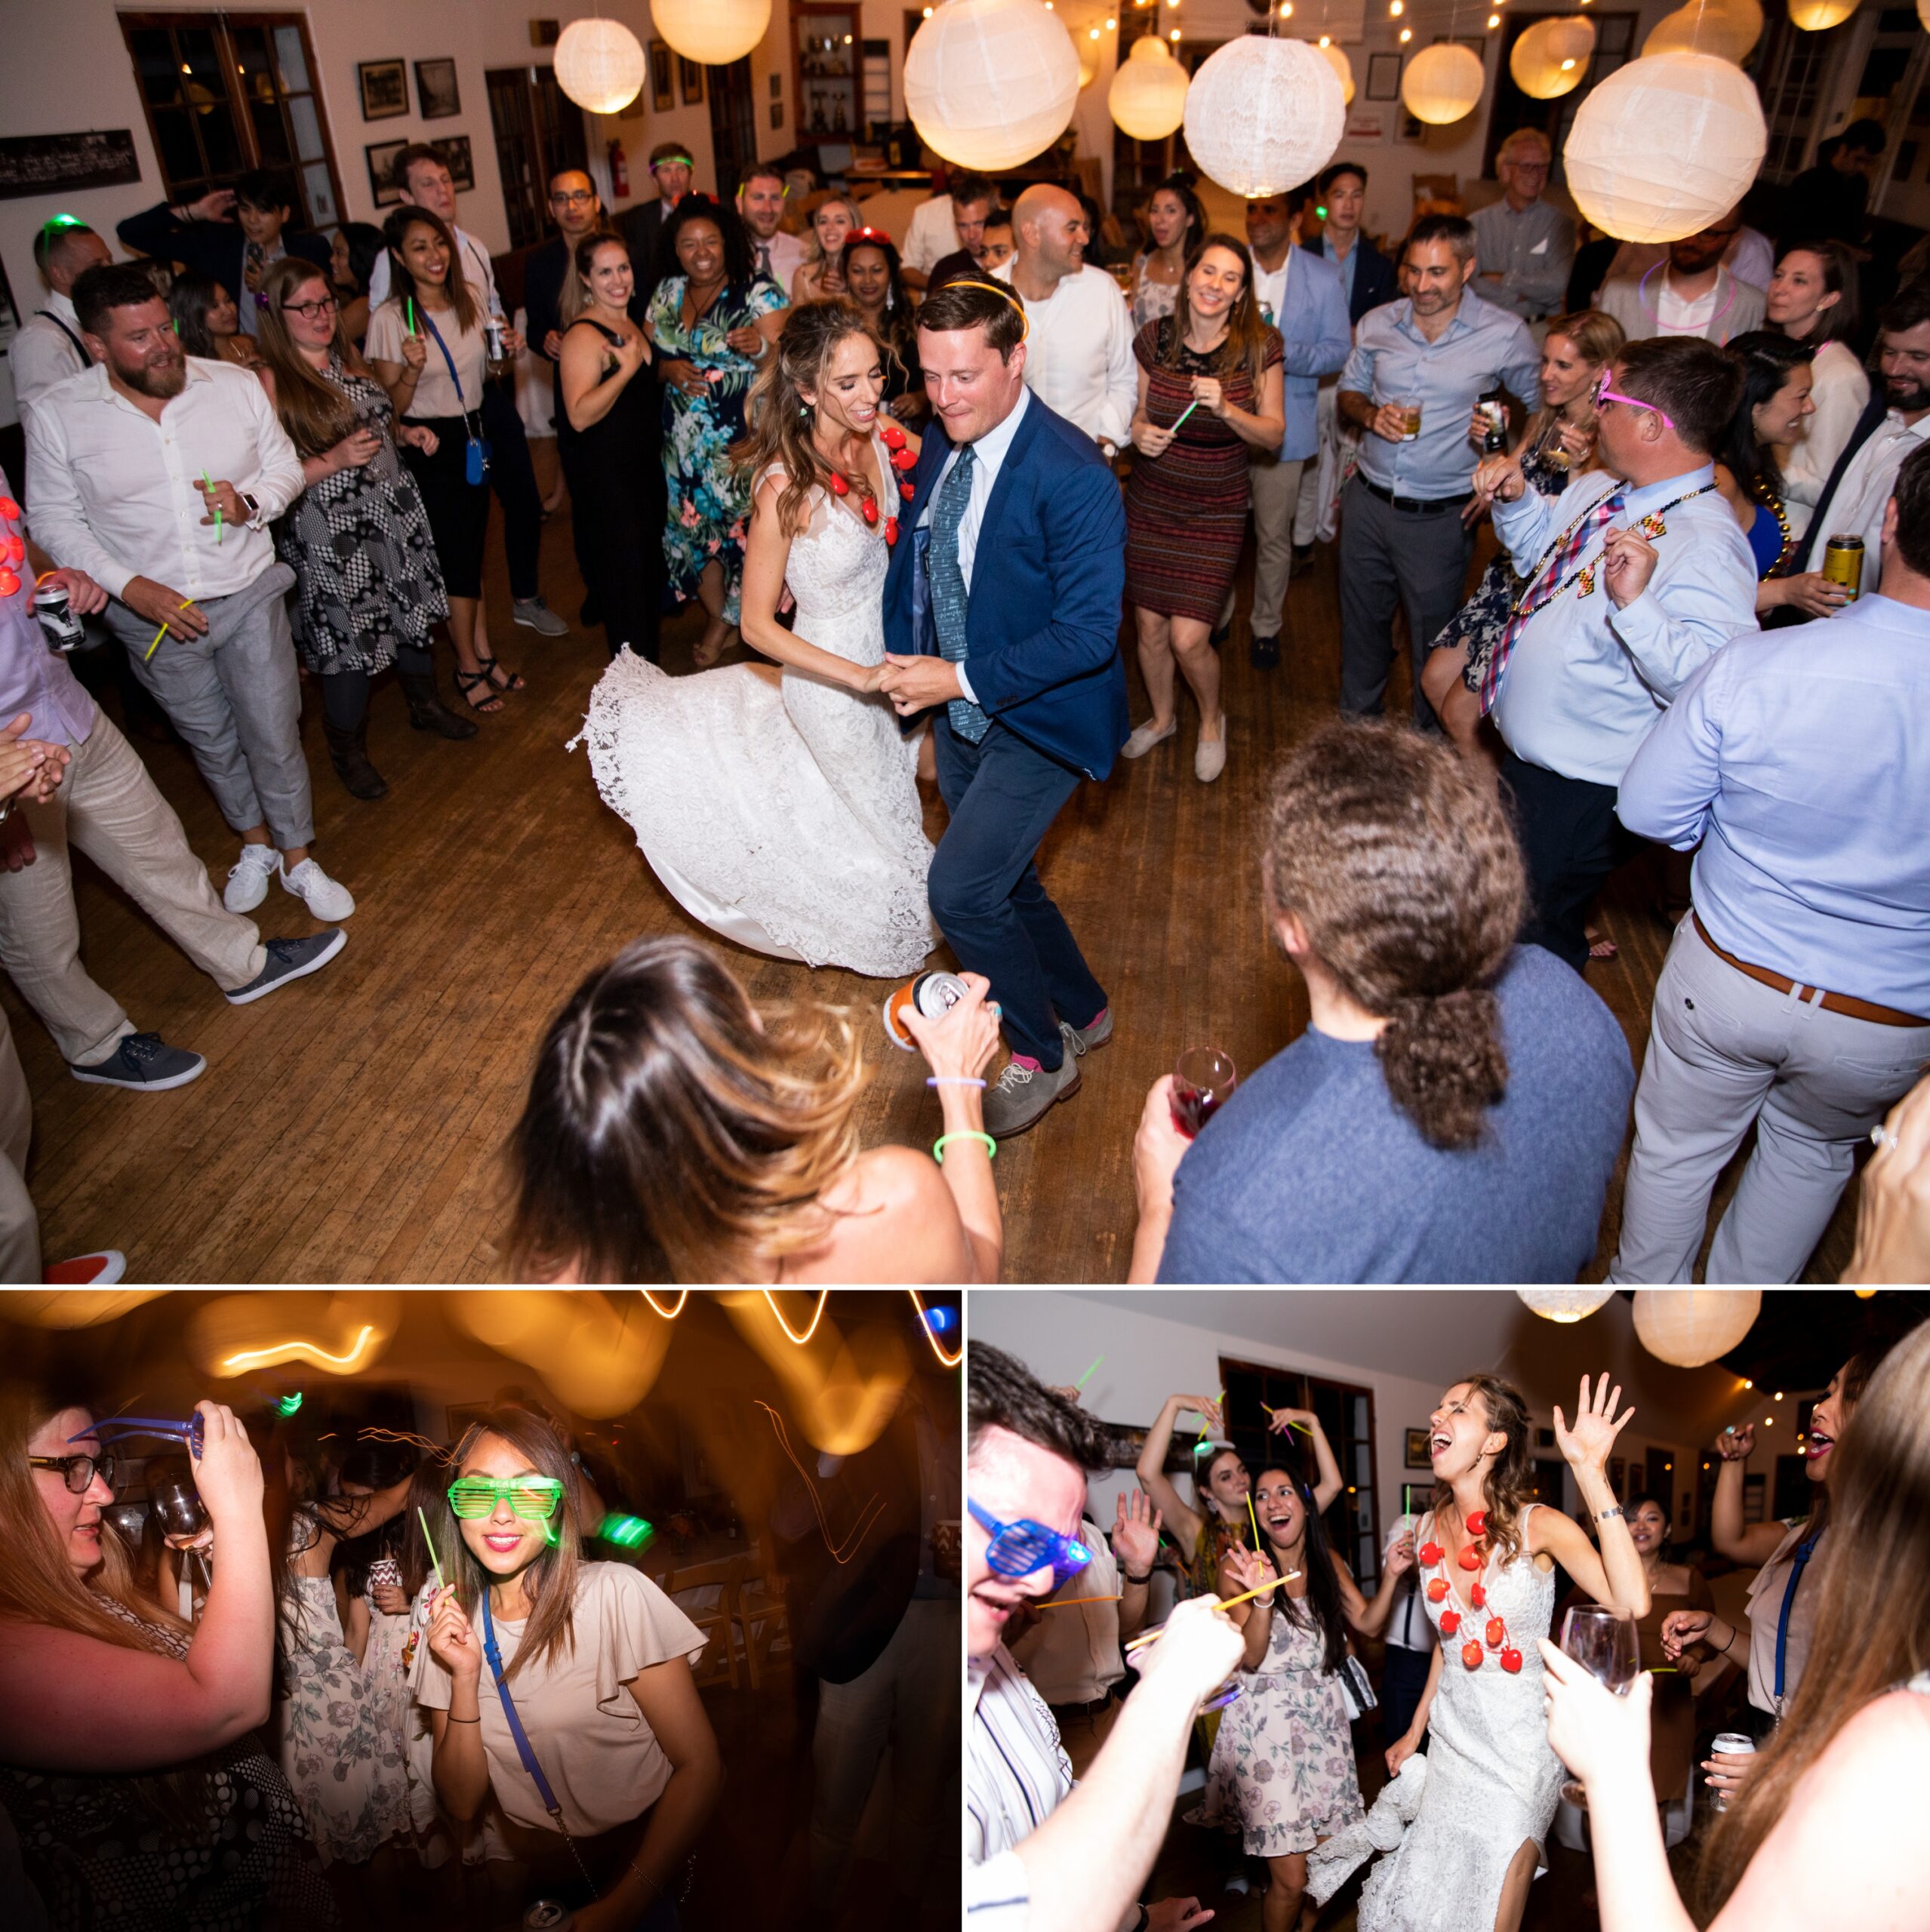 bride dances with guest during party, neon lights and glasses